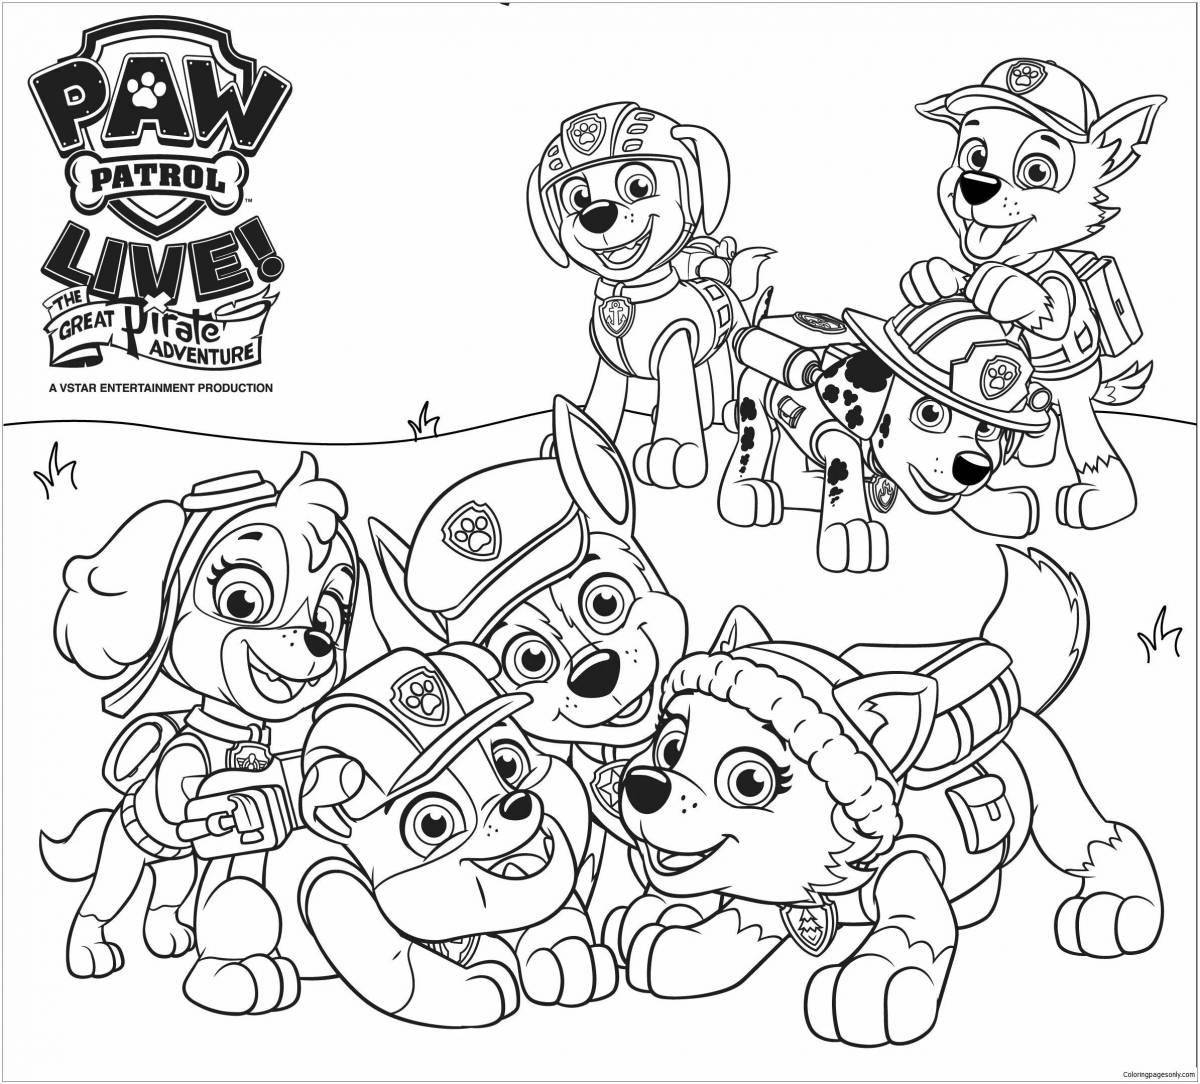 Innovative Paw Patrol coloring book for kids 3 4